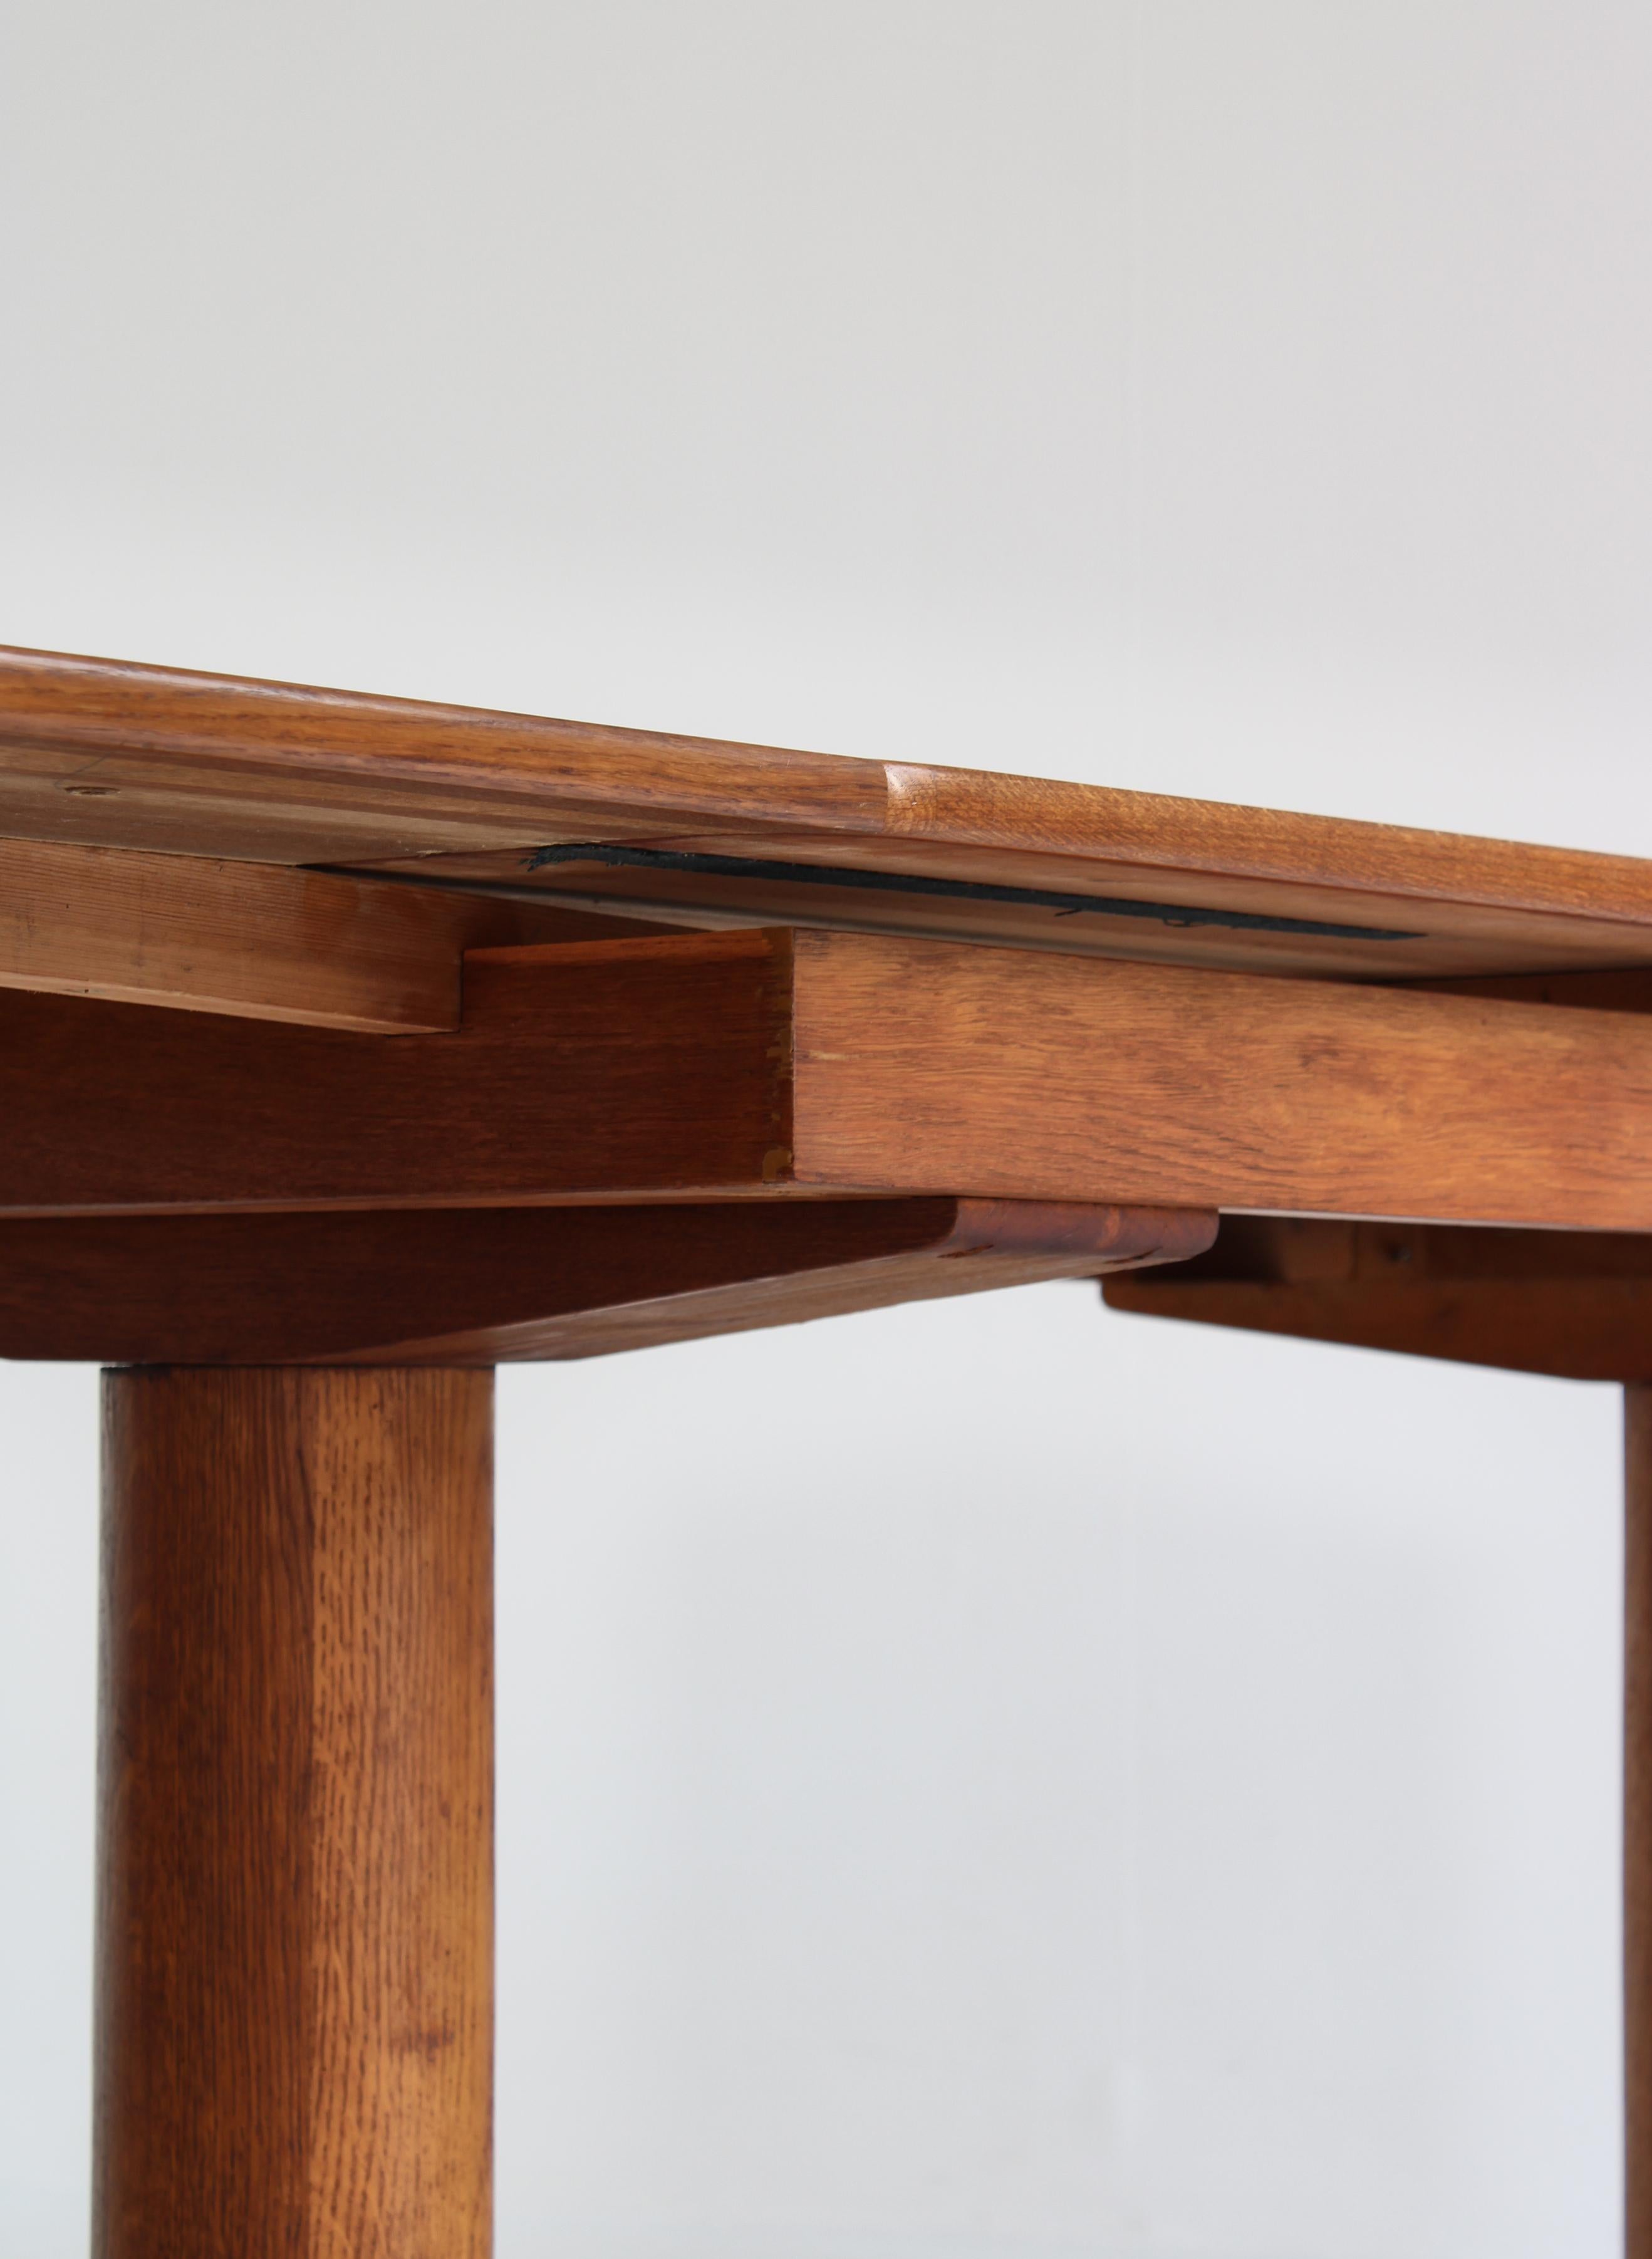 Art Deco Table by Danish Cabinetmaker in Patinated Oak, 1930s For Sale 12